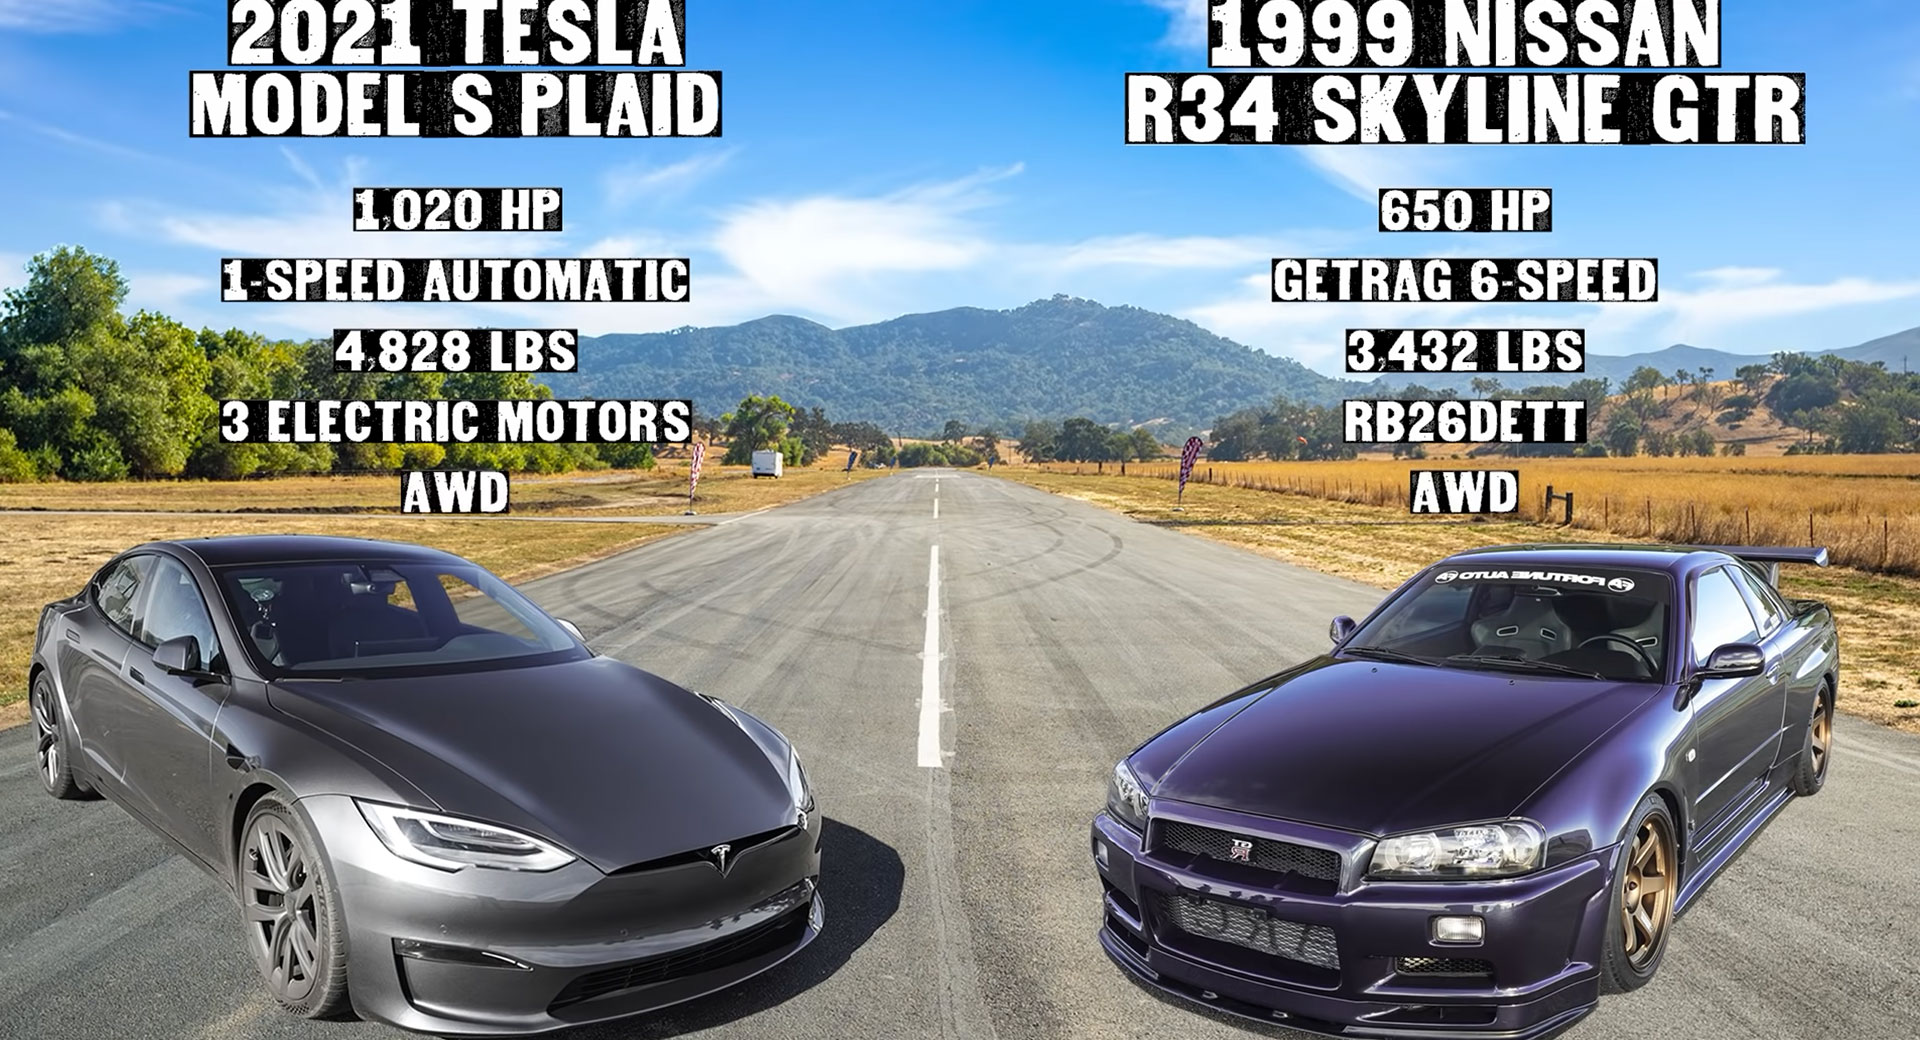 650 HP Nissan Skyline R34 GT-R Has No Hope Against A Tesla Model S Plaid  But Is So Much Cooler | Carscoops